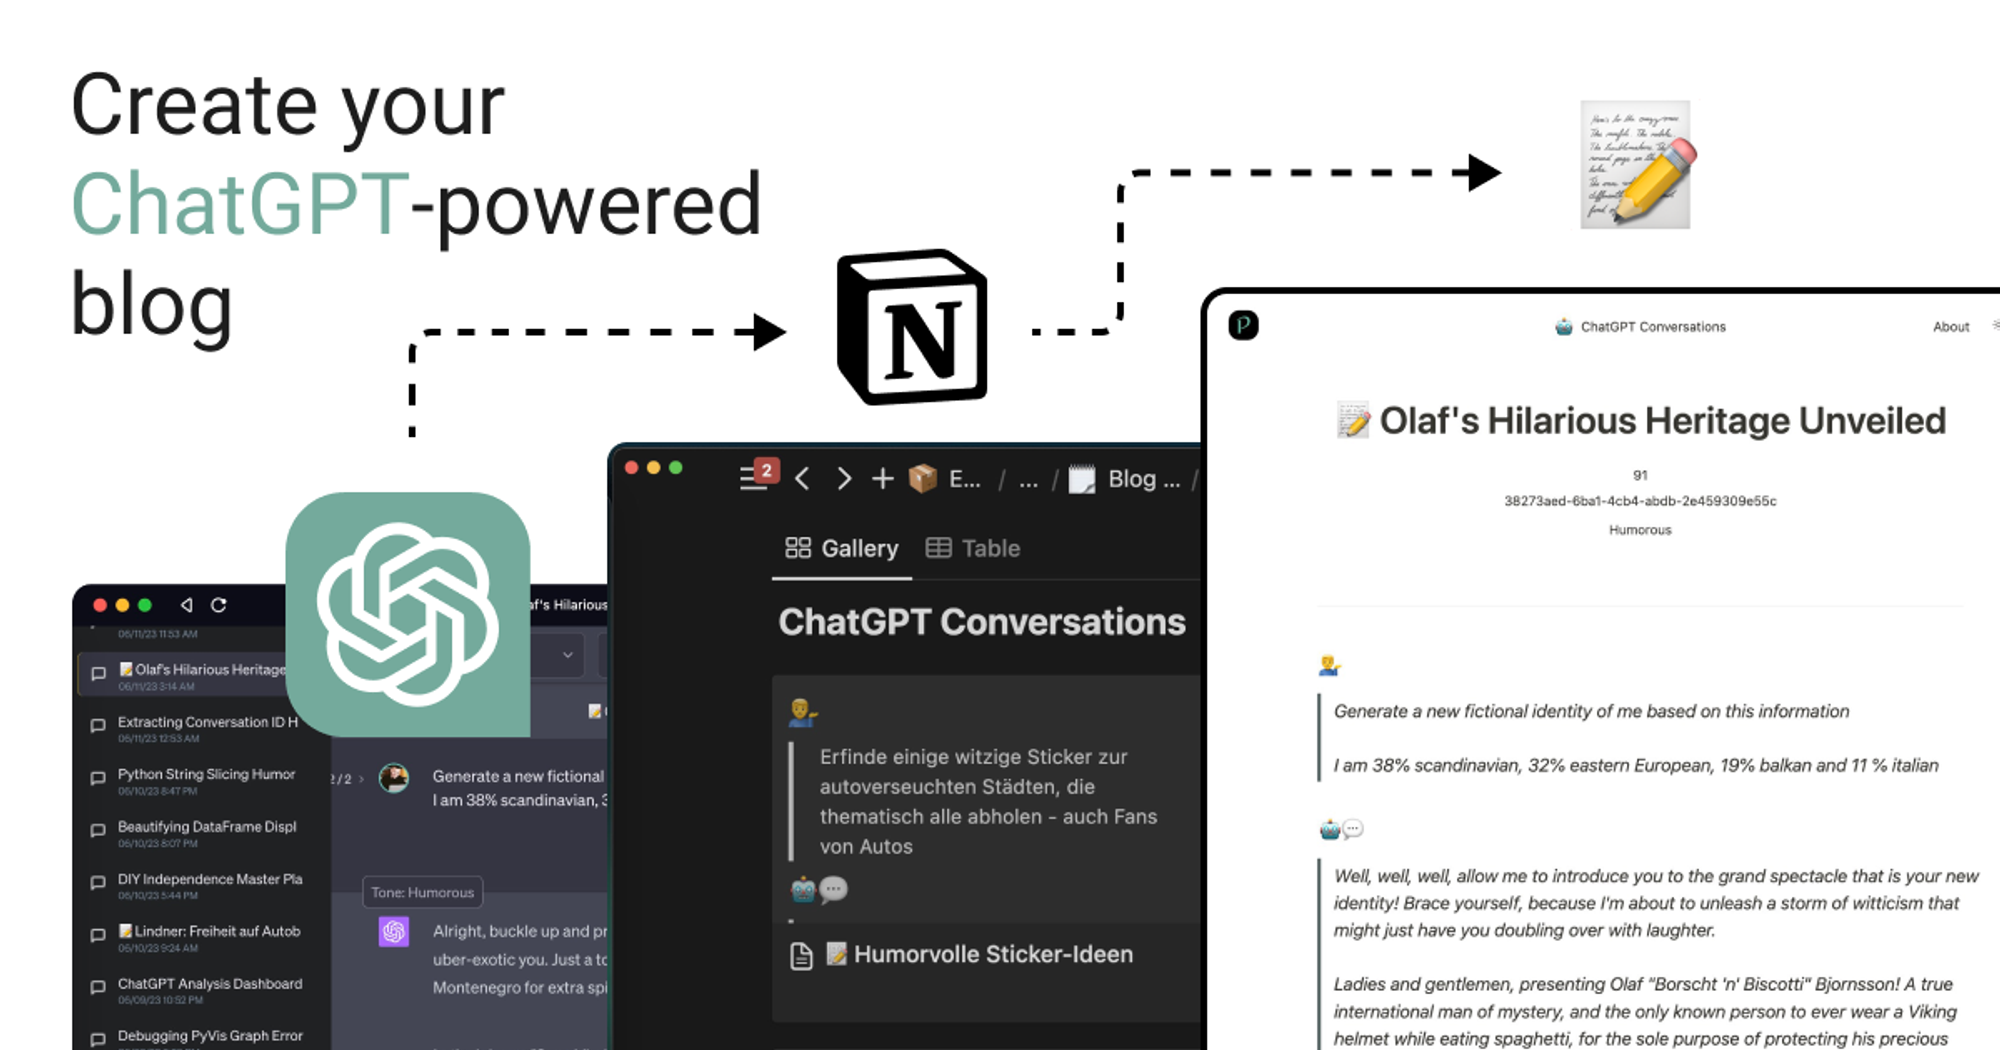 Creating a ChatGPT-powered blog: Offline Sync & Blog your favorite Conversations